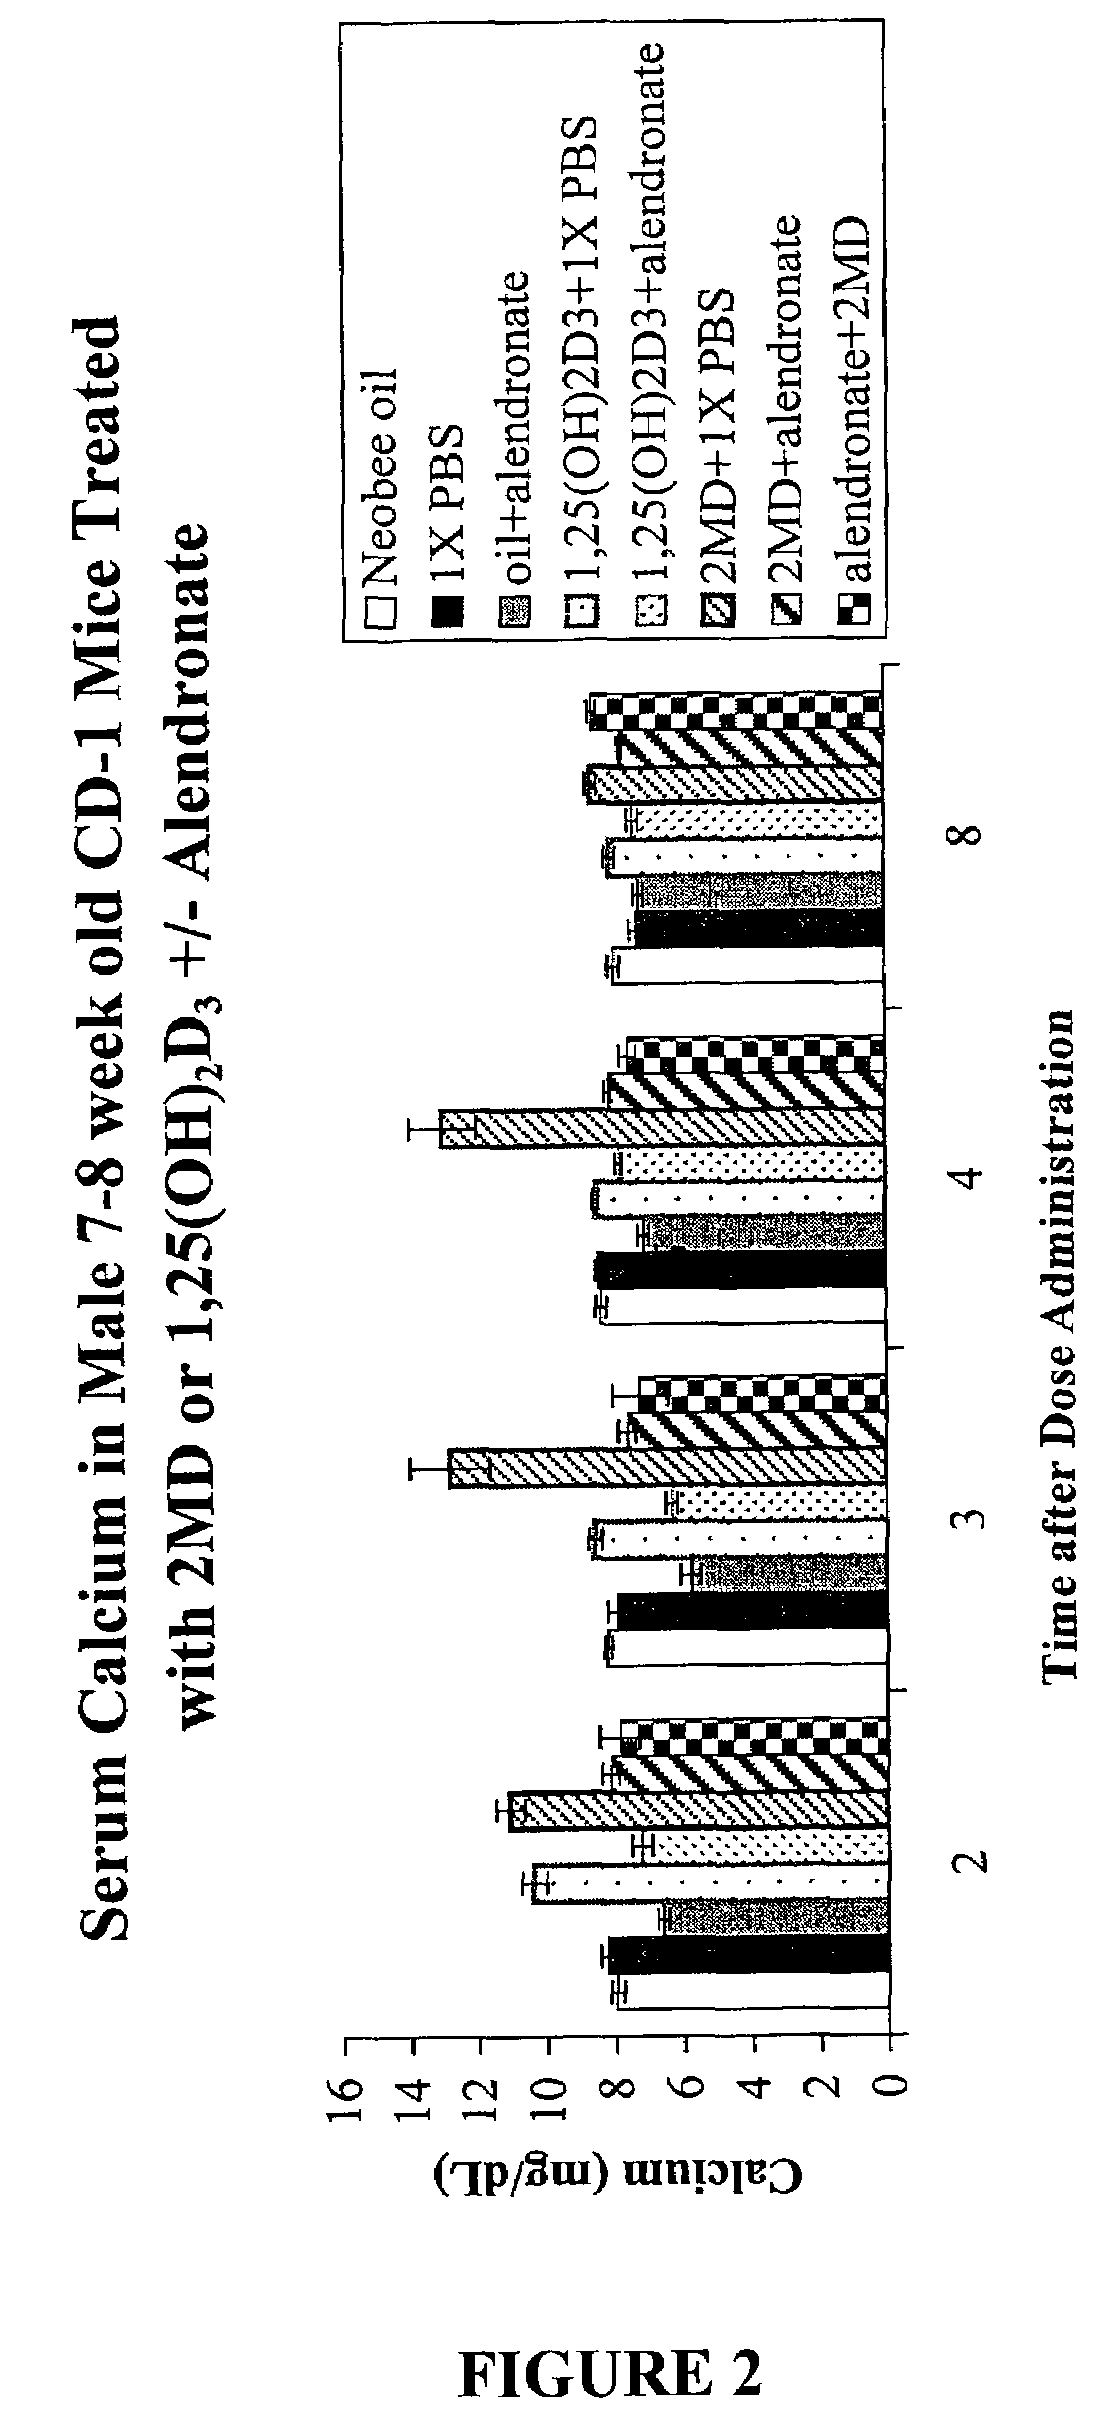 Method of extending the dose range of vitamin D compounds